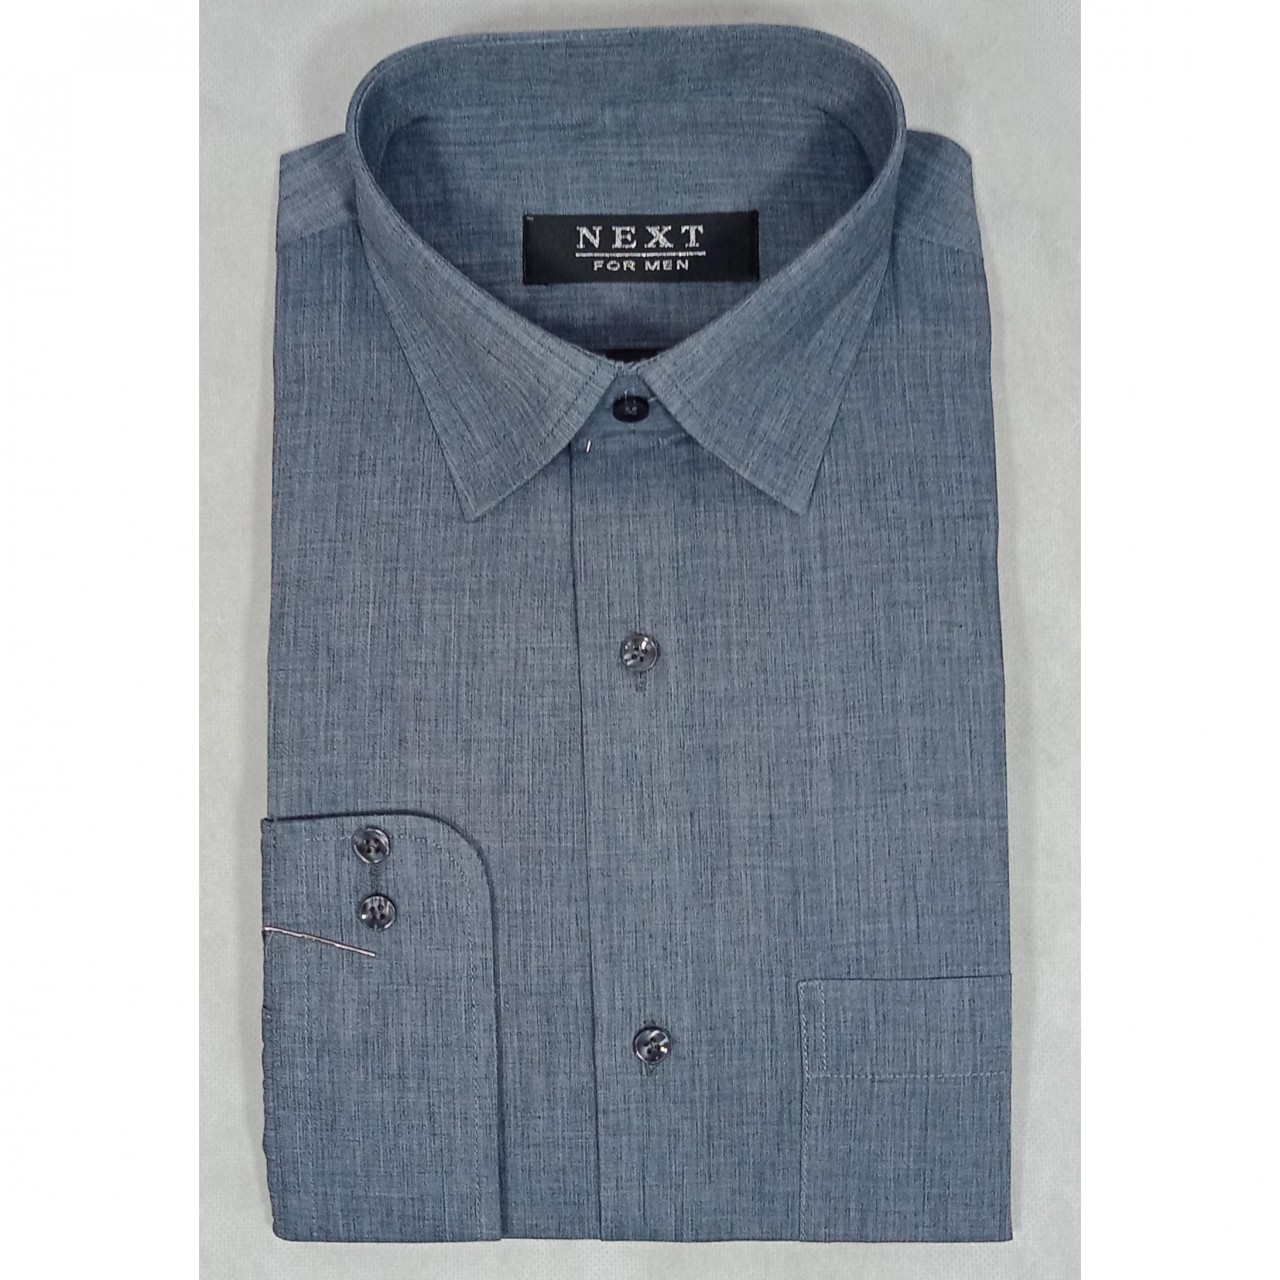 Raven Chambray Formal Shirt For Men - Double Needle Stitching